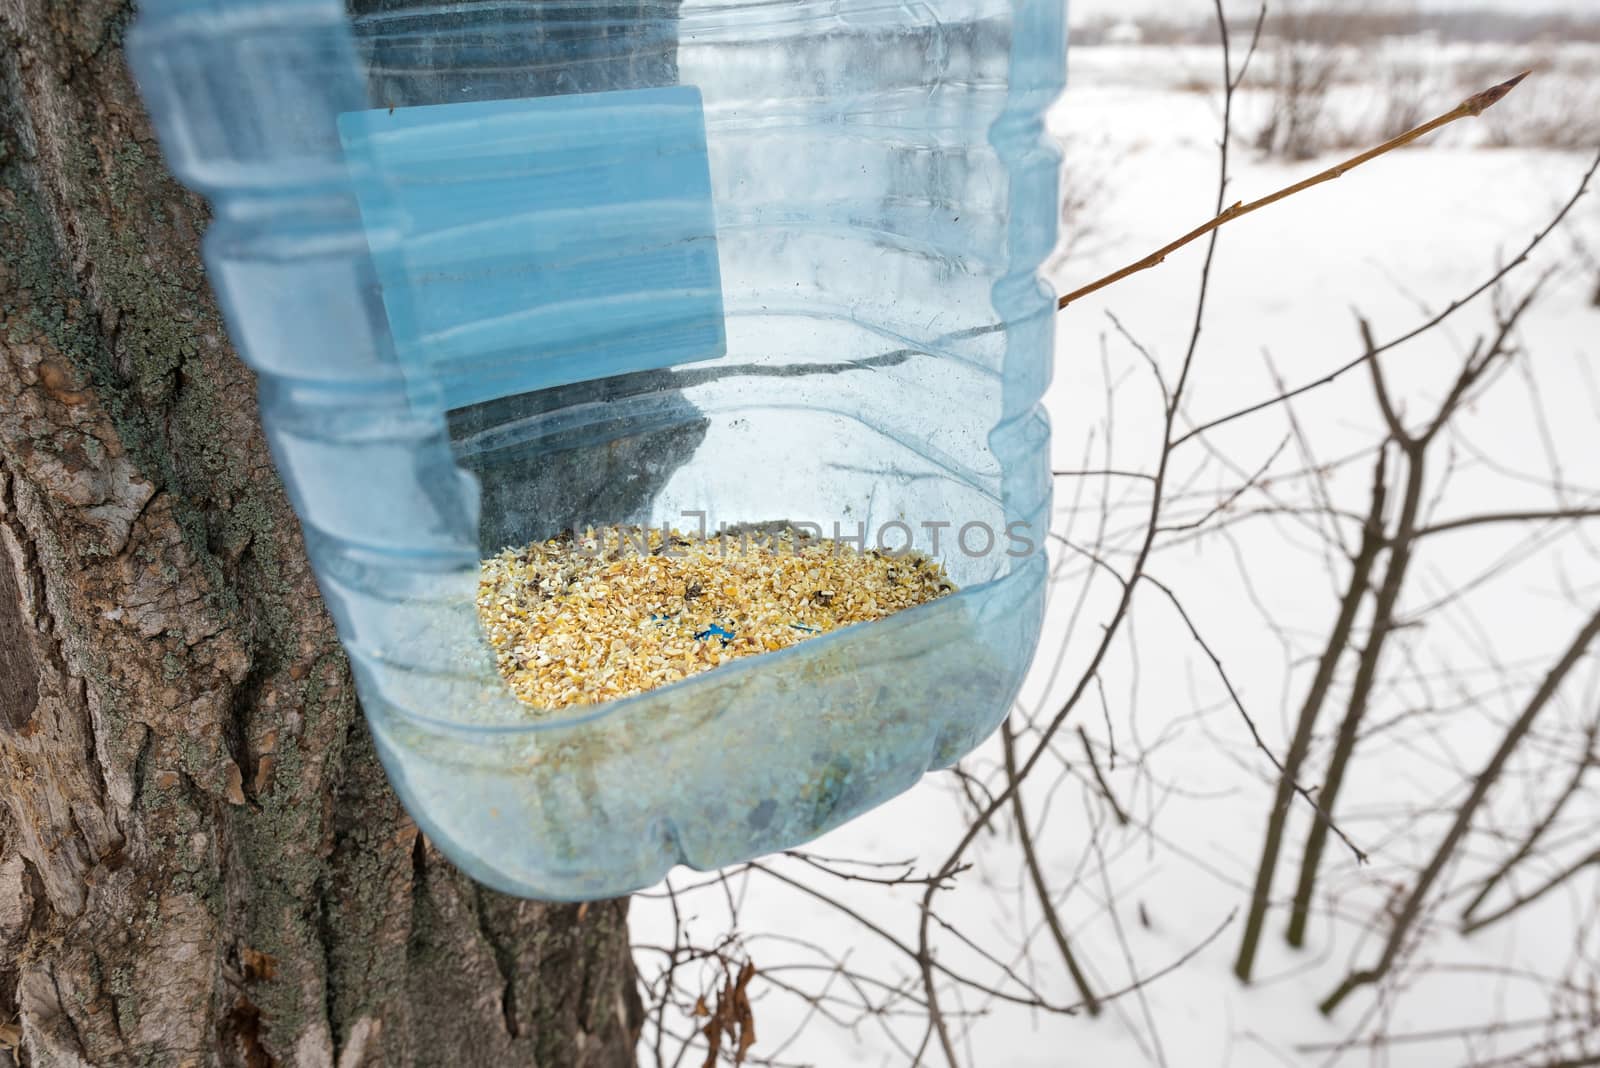 Food as seeds and grains in a bottle transformed in a bird feeder. Seen from a bird point of view